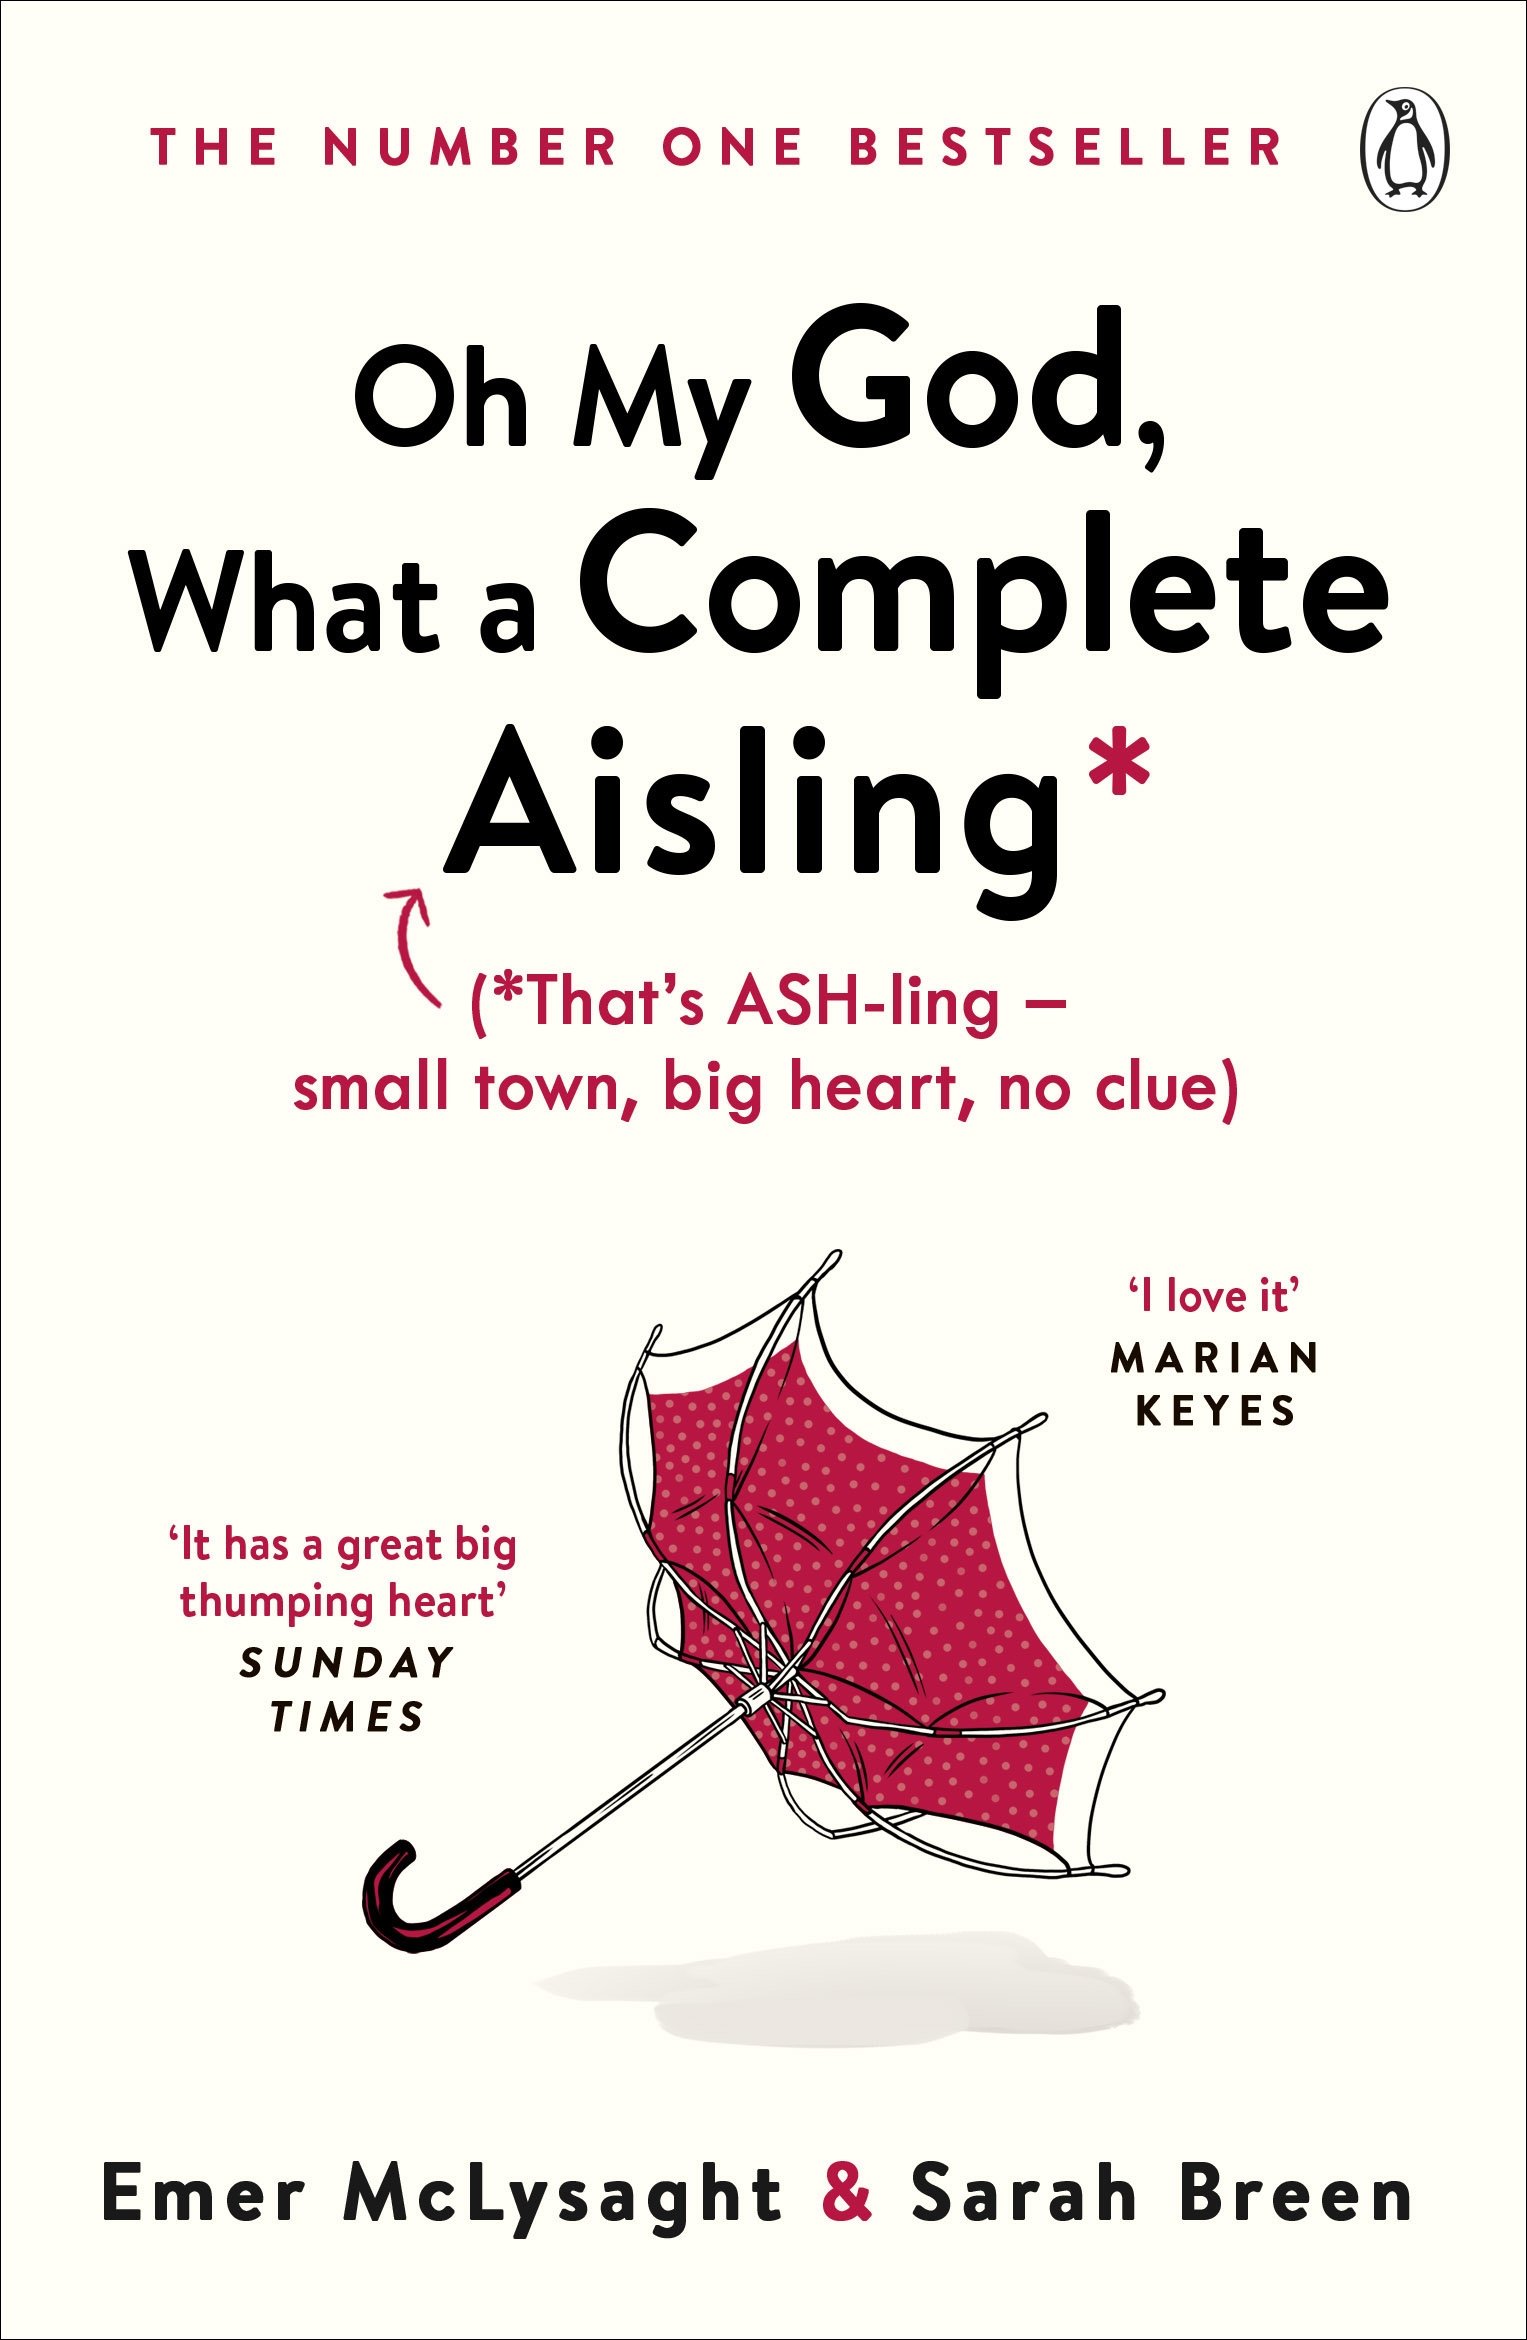 Oh My God, What a Complete Aisling | Emer McLysaght , Sarah Breen image6